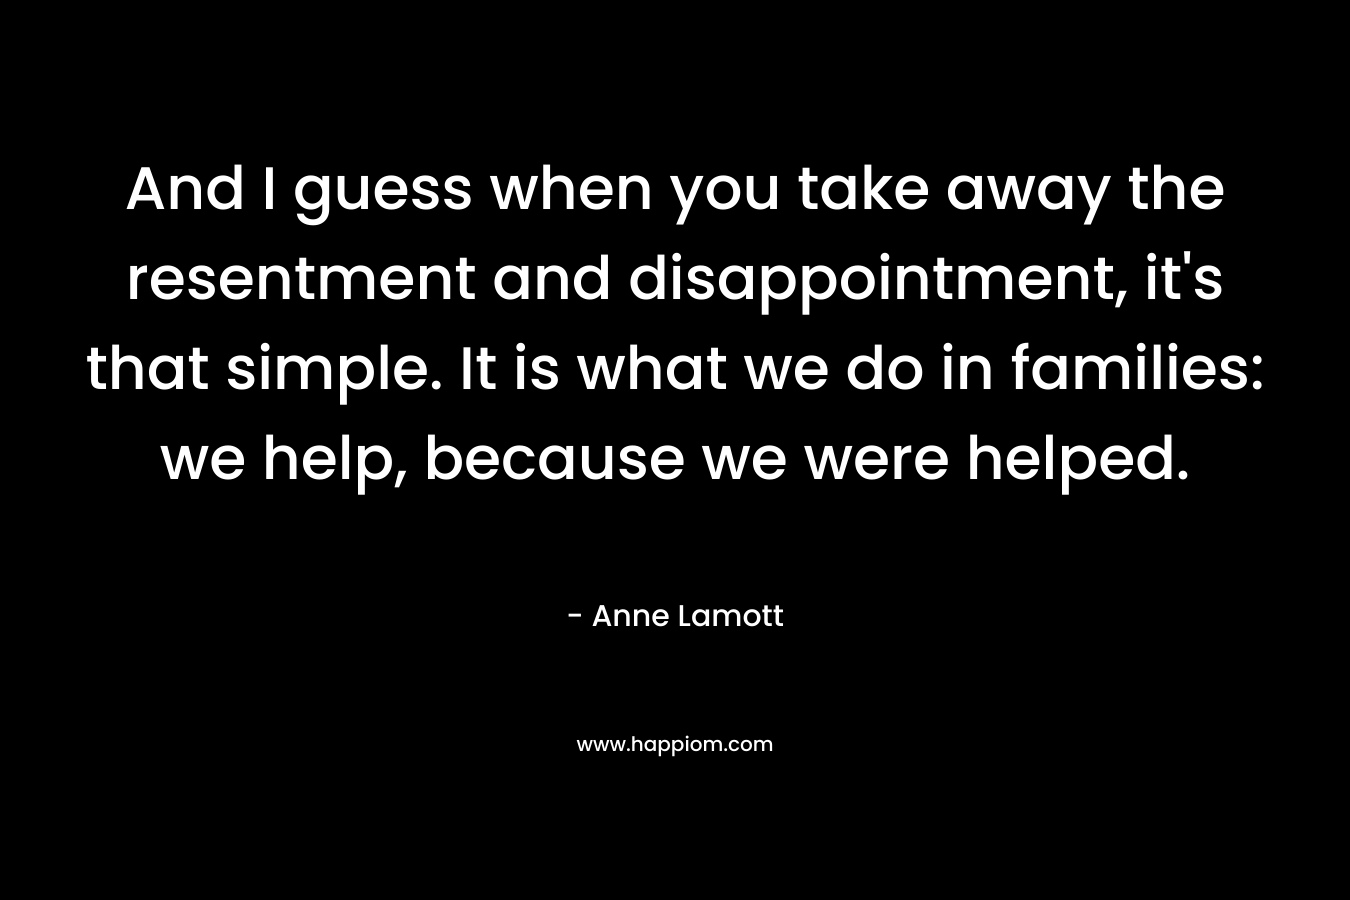 And I guess when you take away the resentment and disappointment, it's that simple. It is what we do in families: we help, because we were helped.